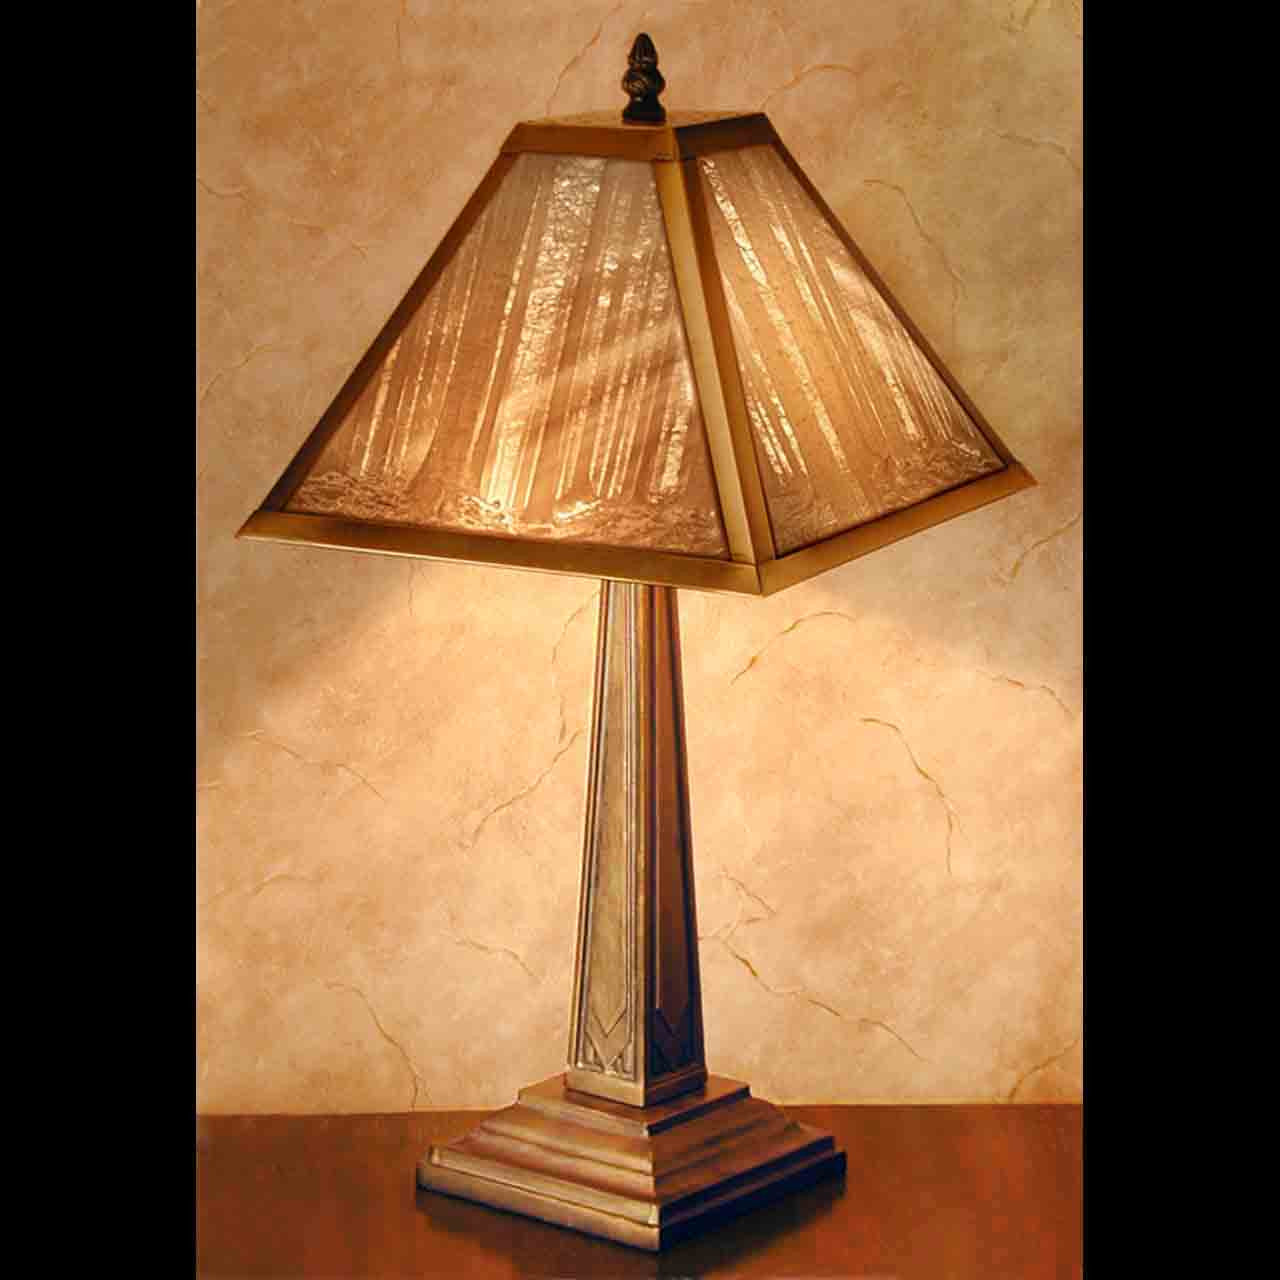 Deep Woods Missionary Style Lithophane Table Lamp